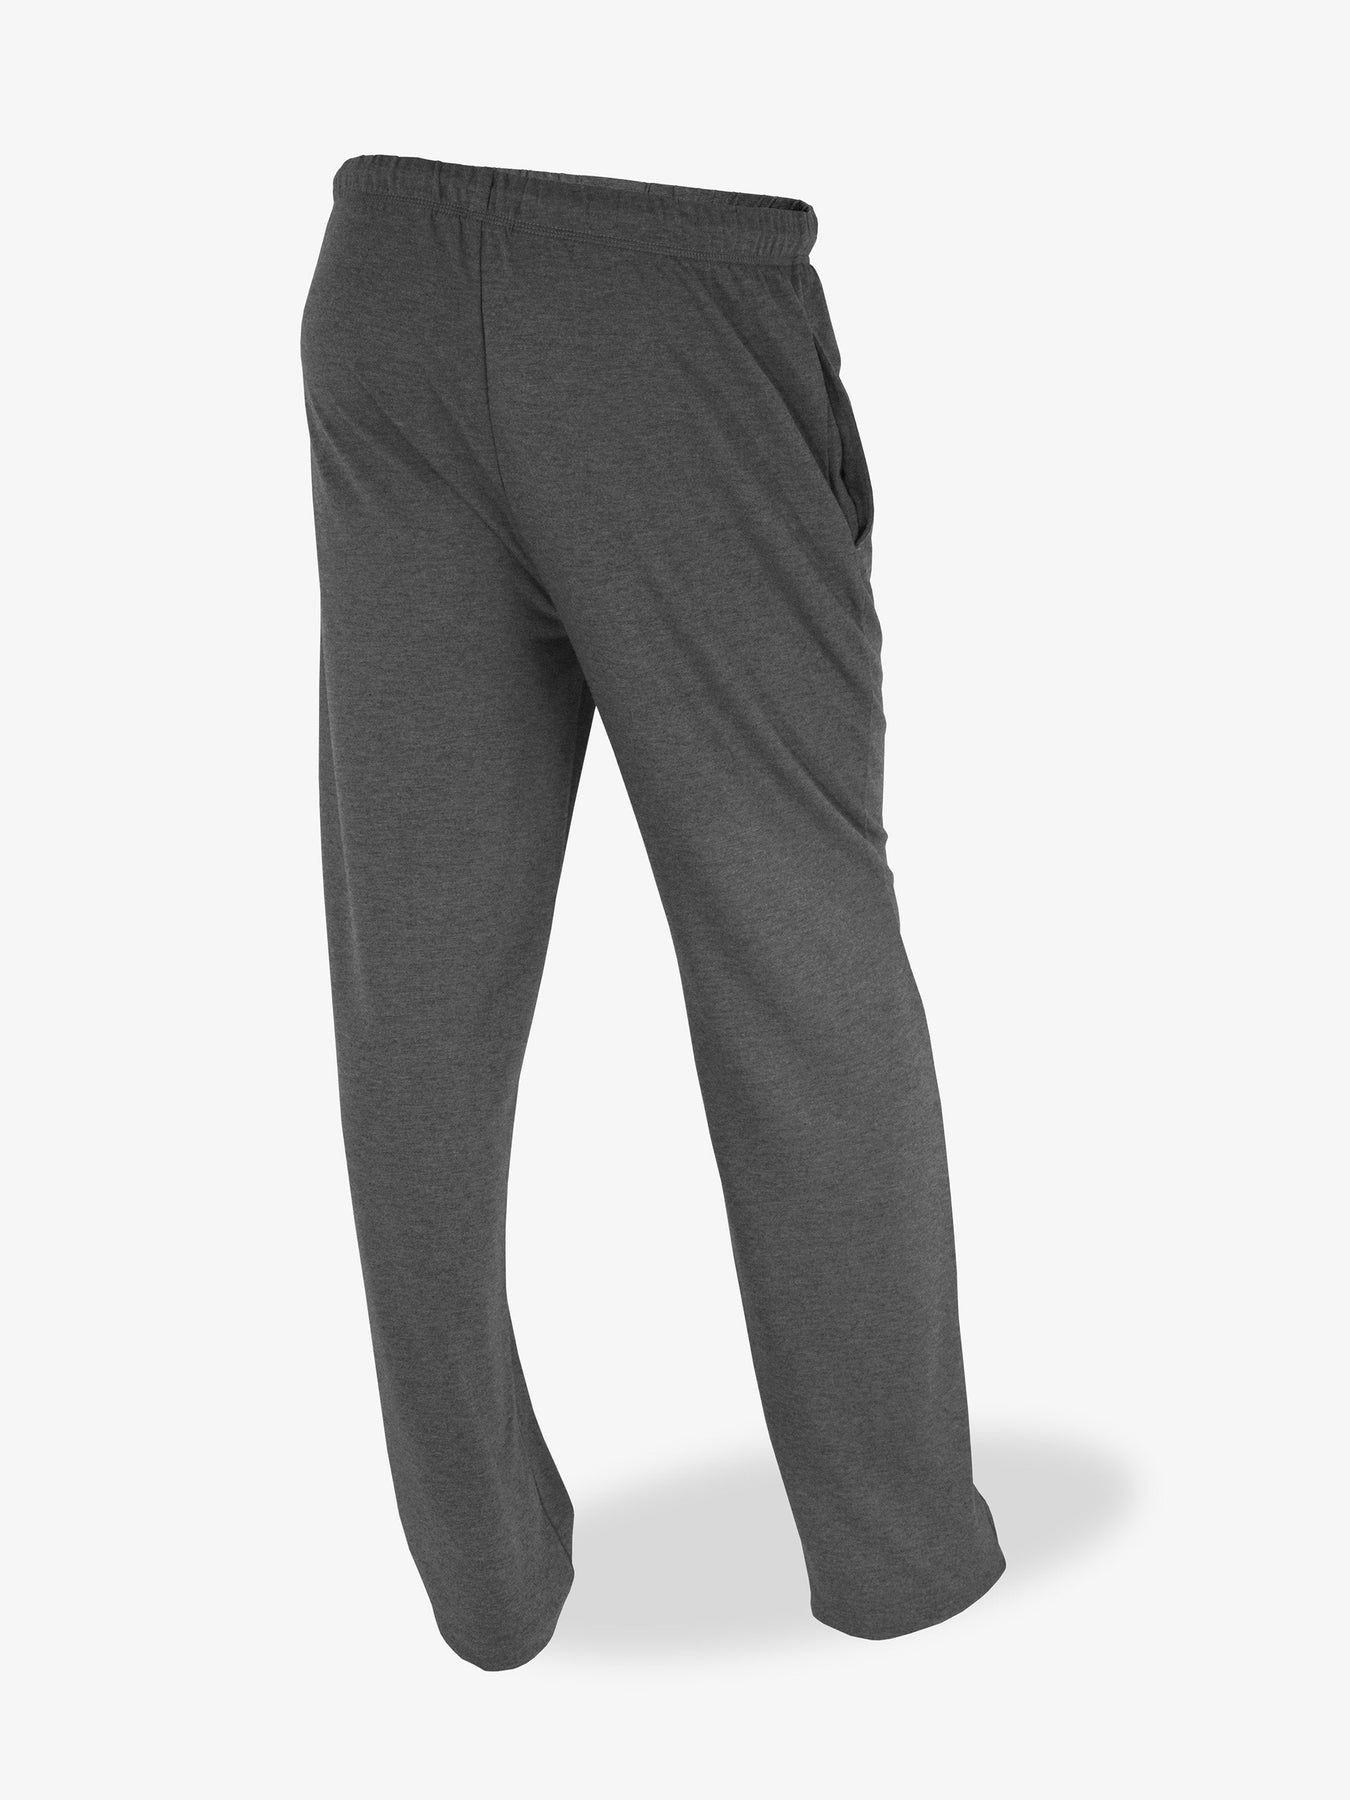 Sleep by Cacique Grey Ribbed Jogger Lounge Pants NWT- Size 14/16 (Inse –  The Saved Collection